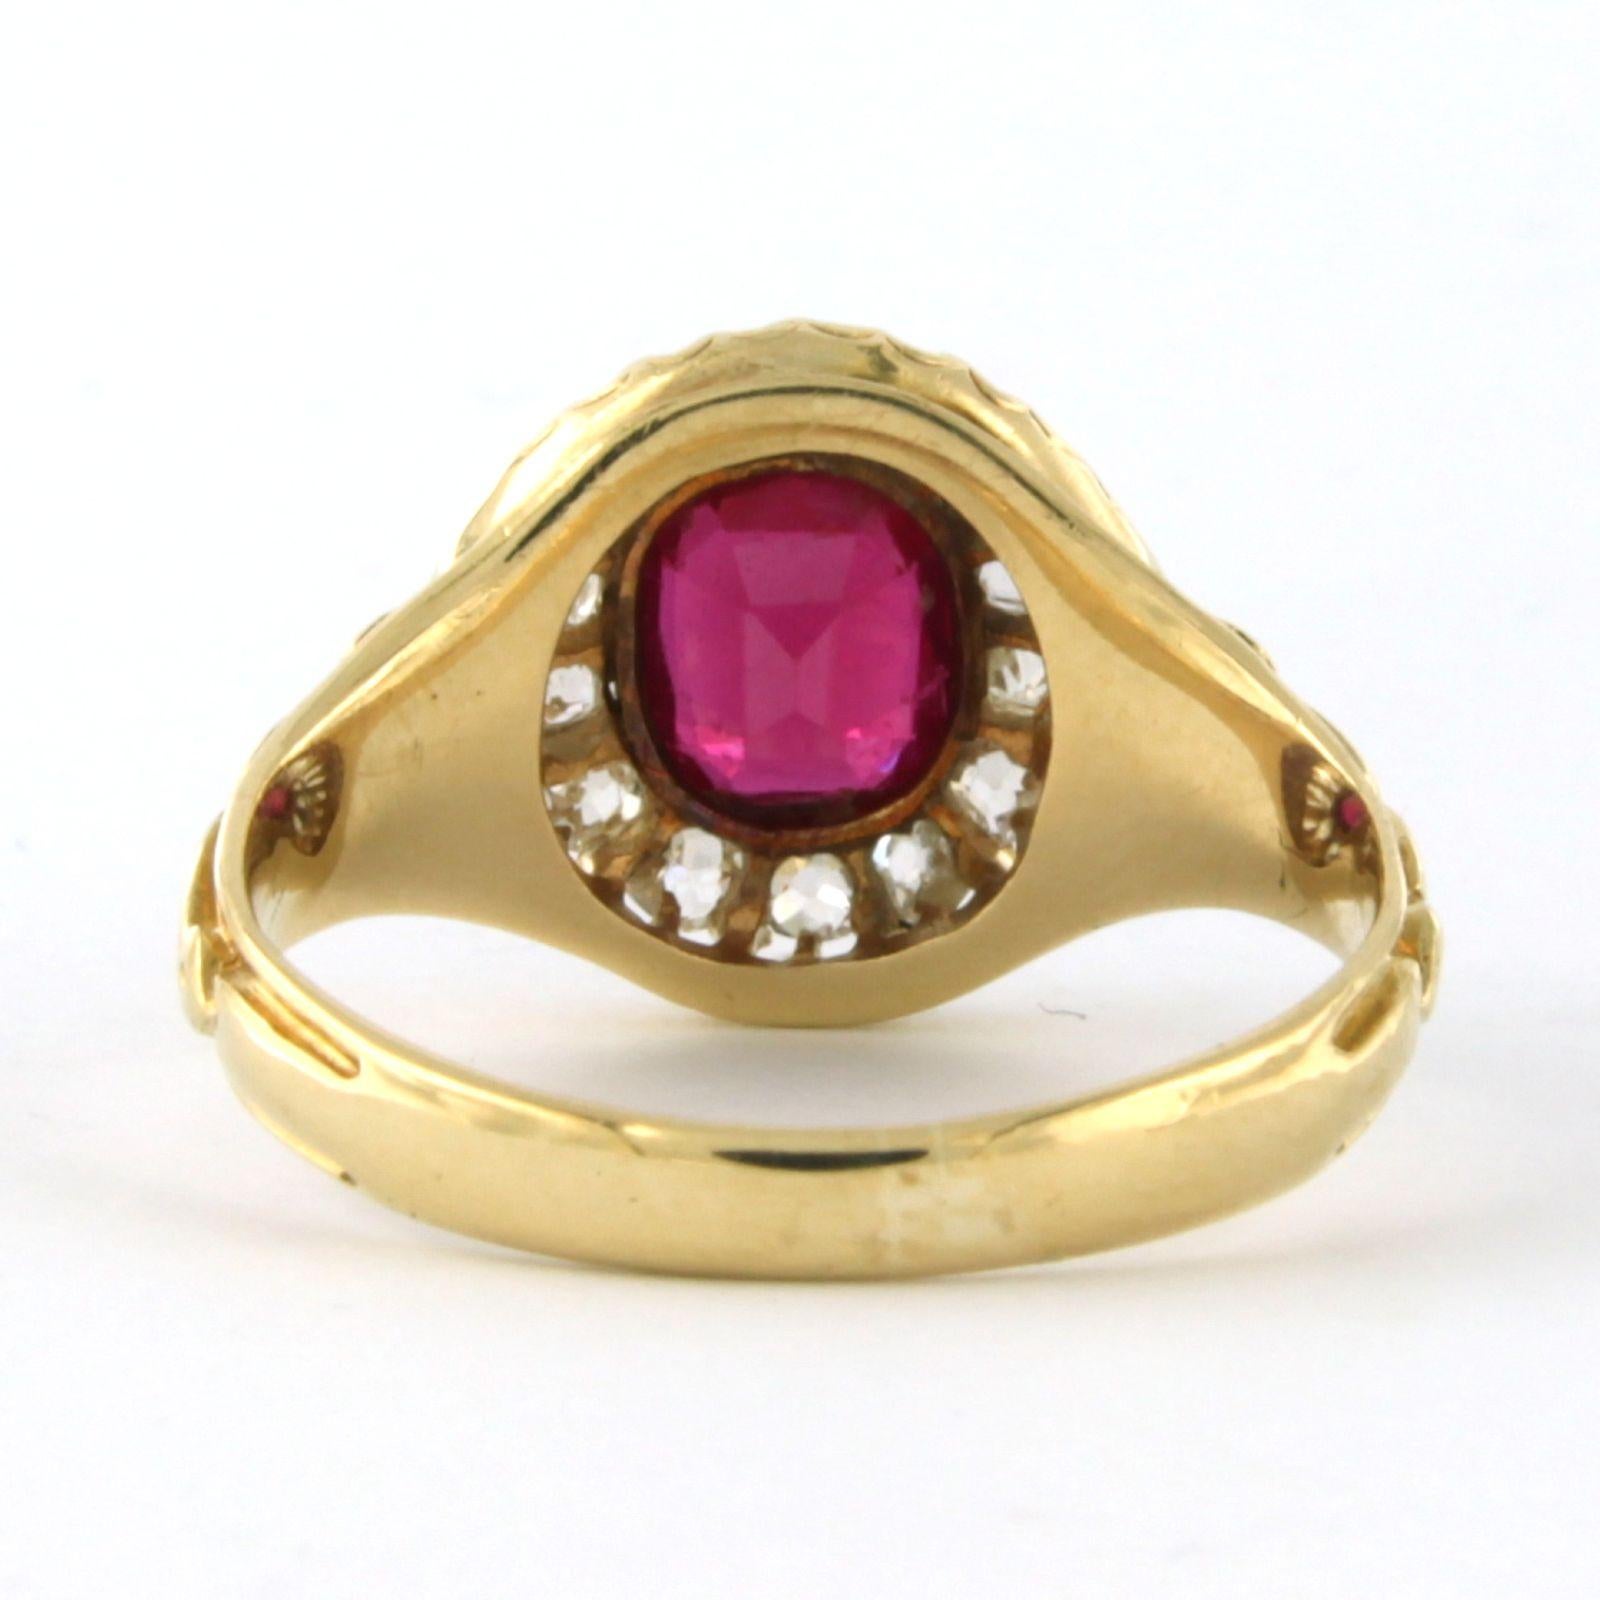 18 kt yellow gold ring set with ruby ​​verneuille and old mine cut diamonds tot. 0.40 ct - F/G - SI - ring size U.S. 8 - EU. 18(57)

detailed description:

the top of the ring is 1.3 cm wide by 4.9 mm high

Ring size U.S. 8 - EU. 18(57), ring can be